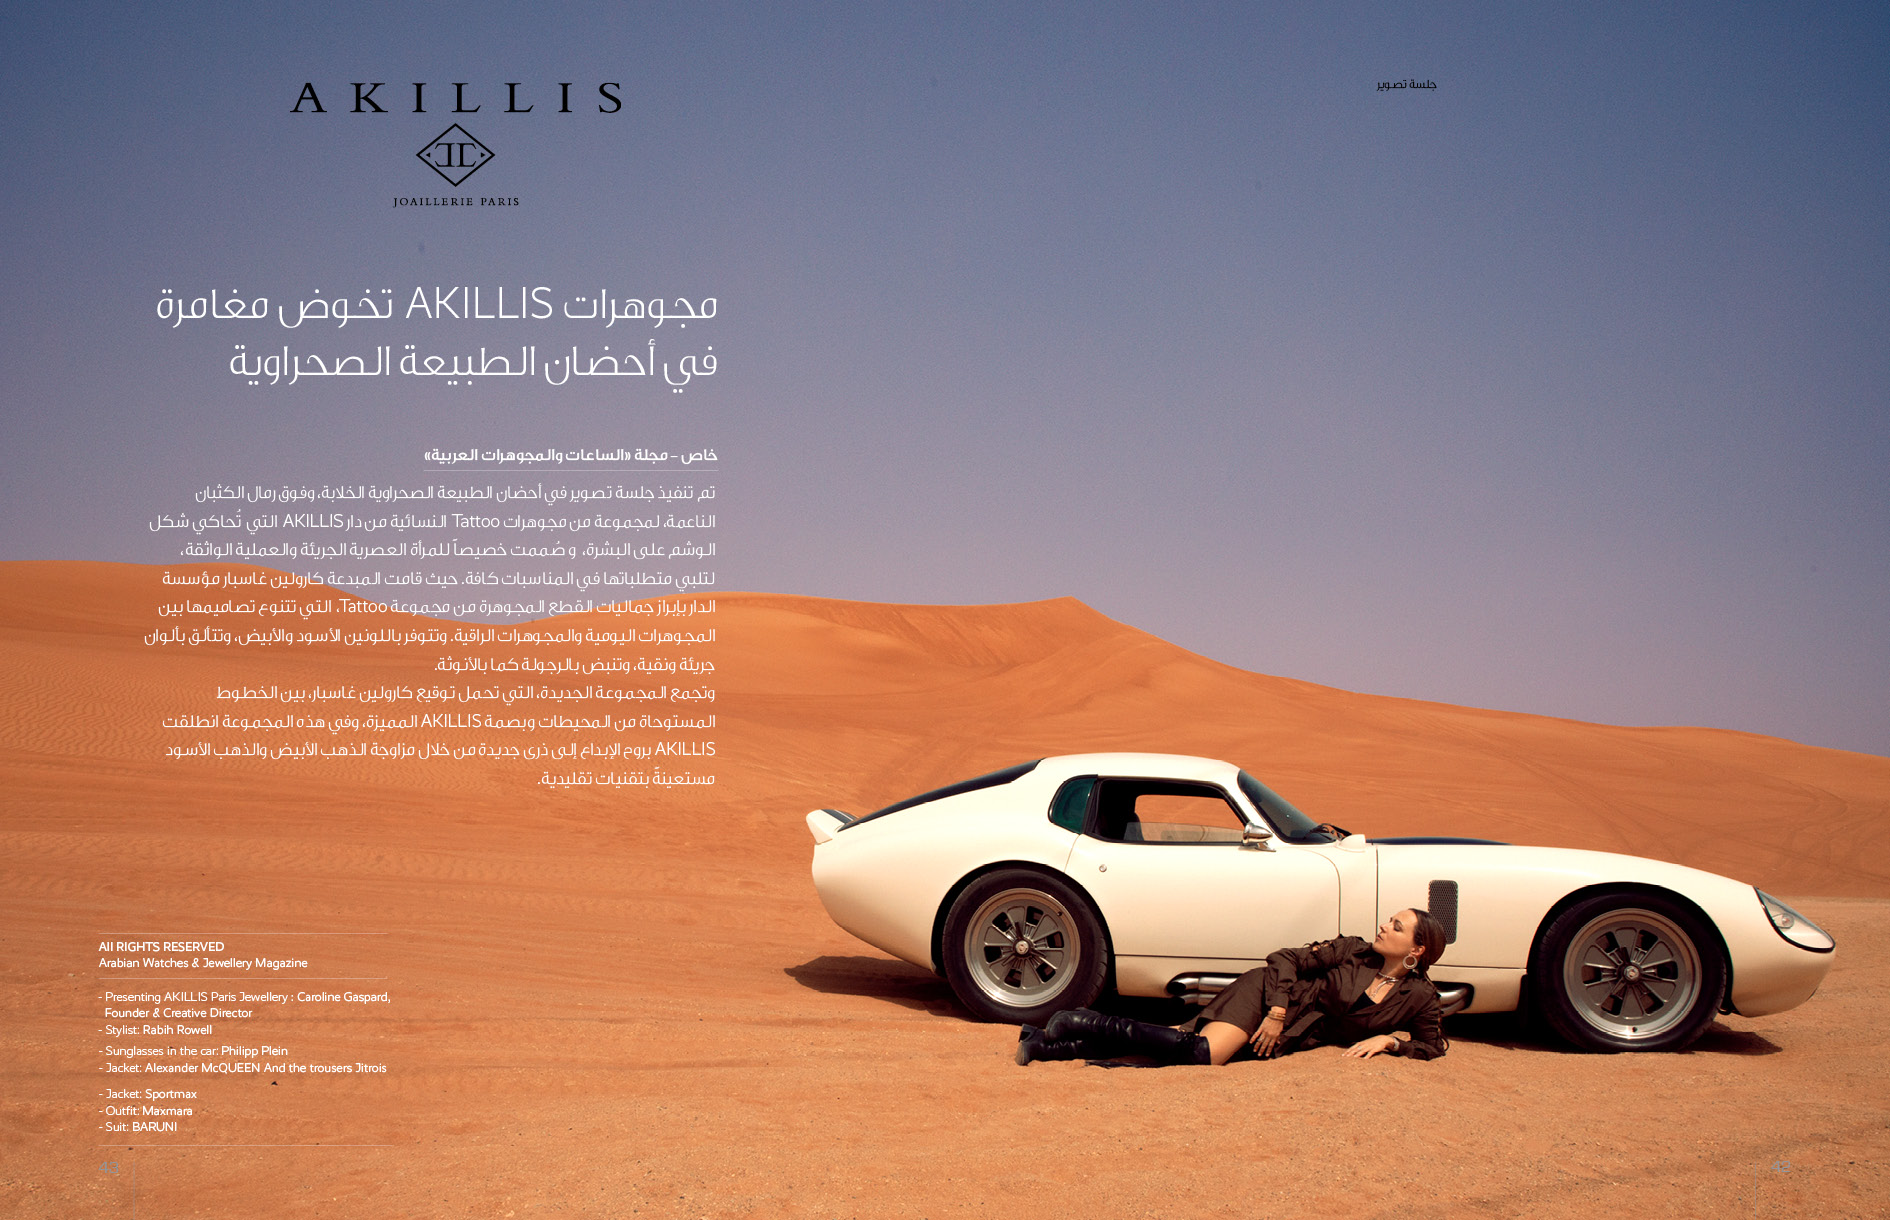 Akillis Photoshoot in AWJ April - May 2021 issue